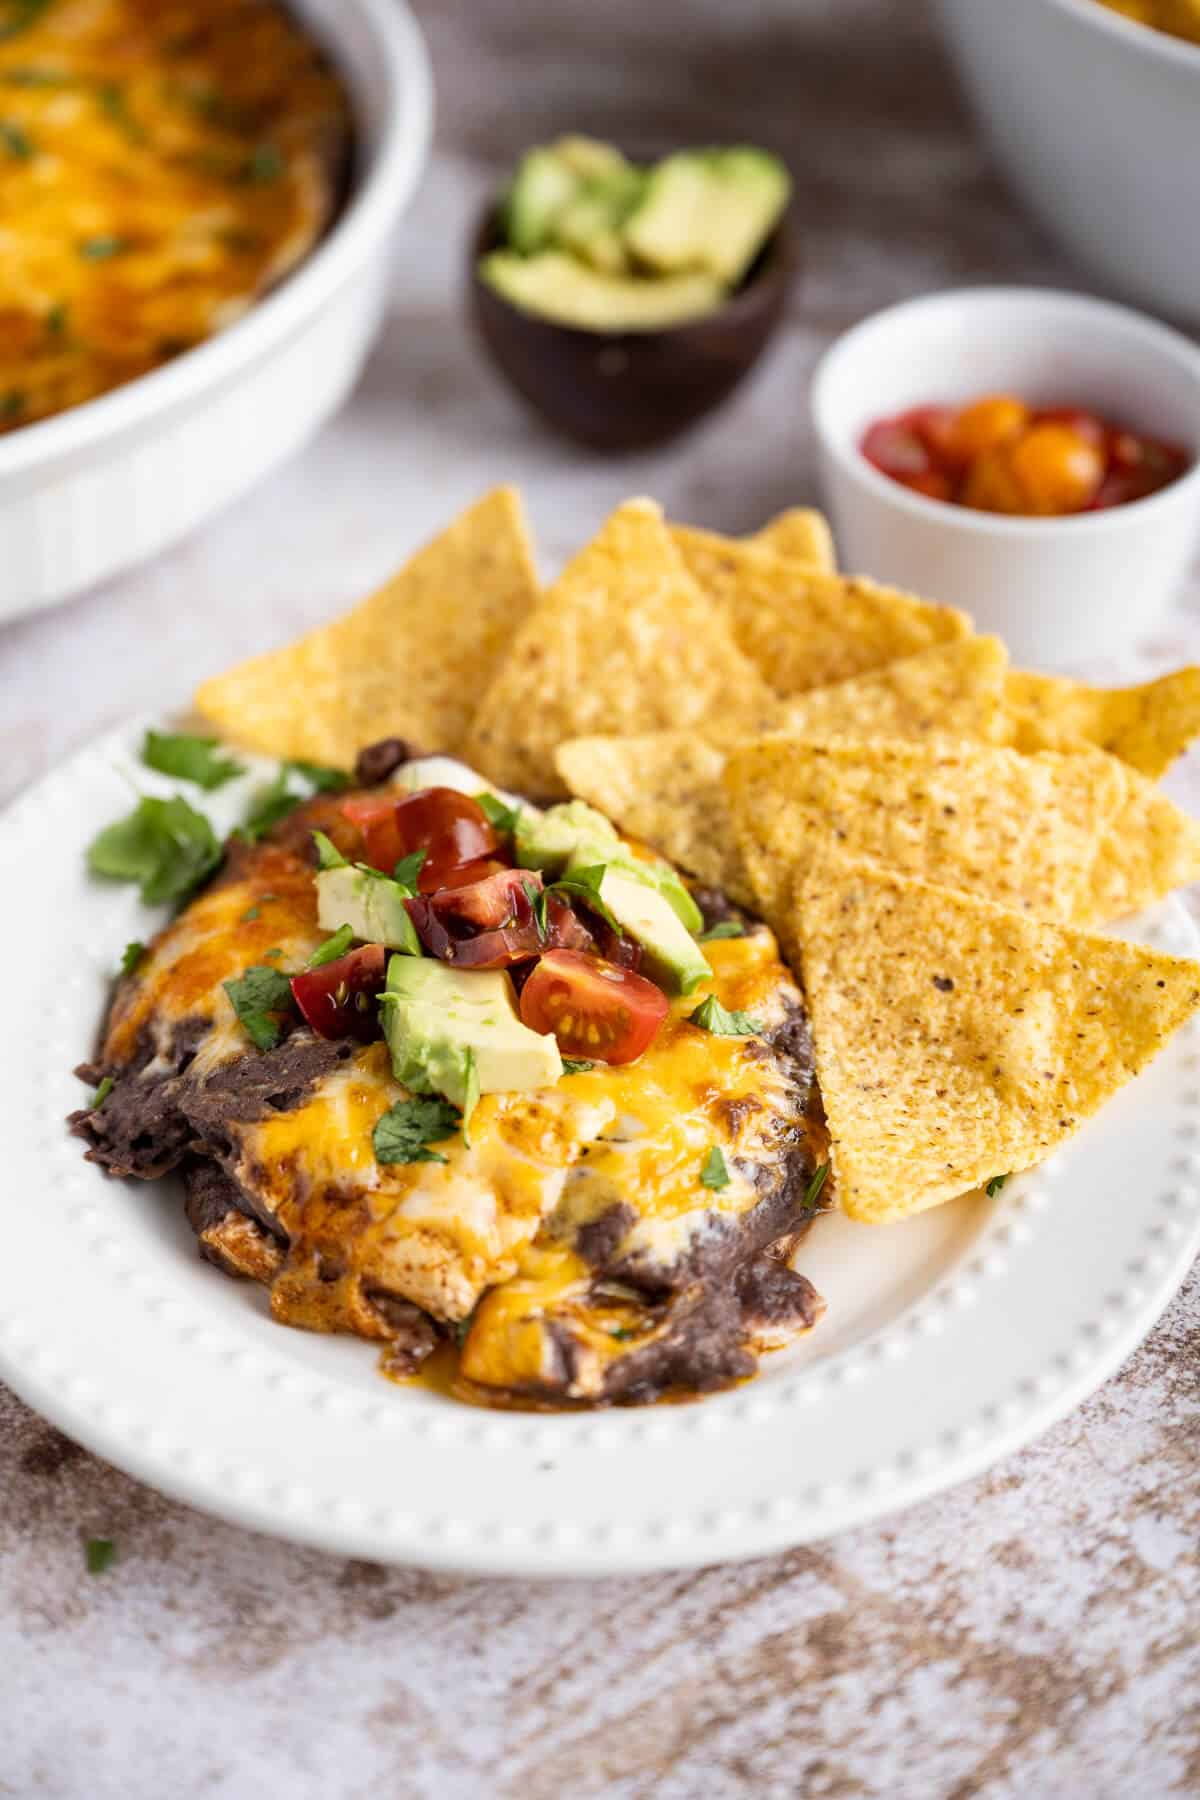 Warm black bean dip topped with melted cheese, cilantro, diced tomato and diced avocado, on a white plate with a side of tortilla chips.